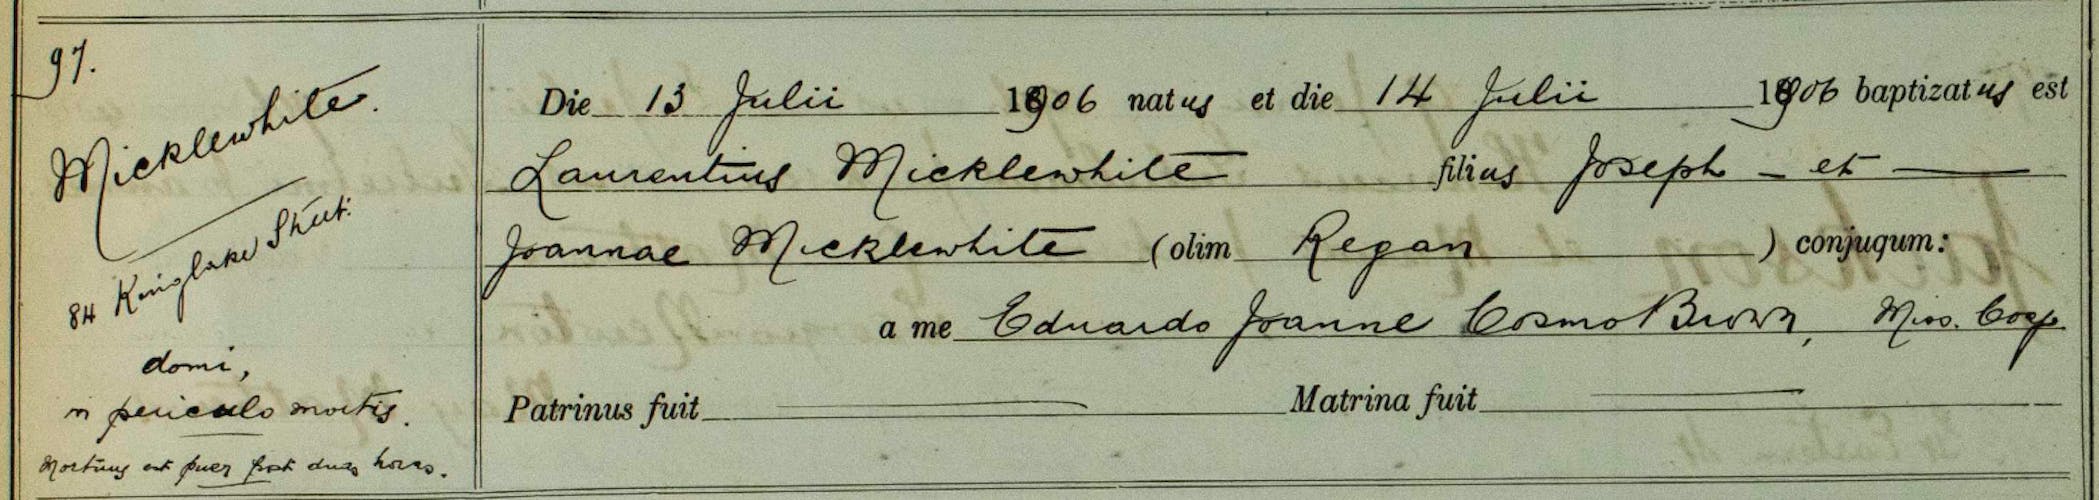 Lawrence Micklewhite's baptism record. 